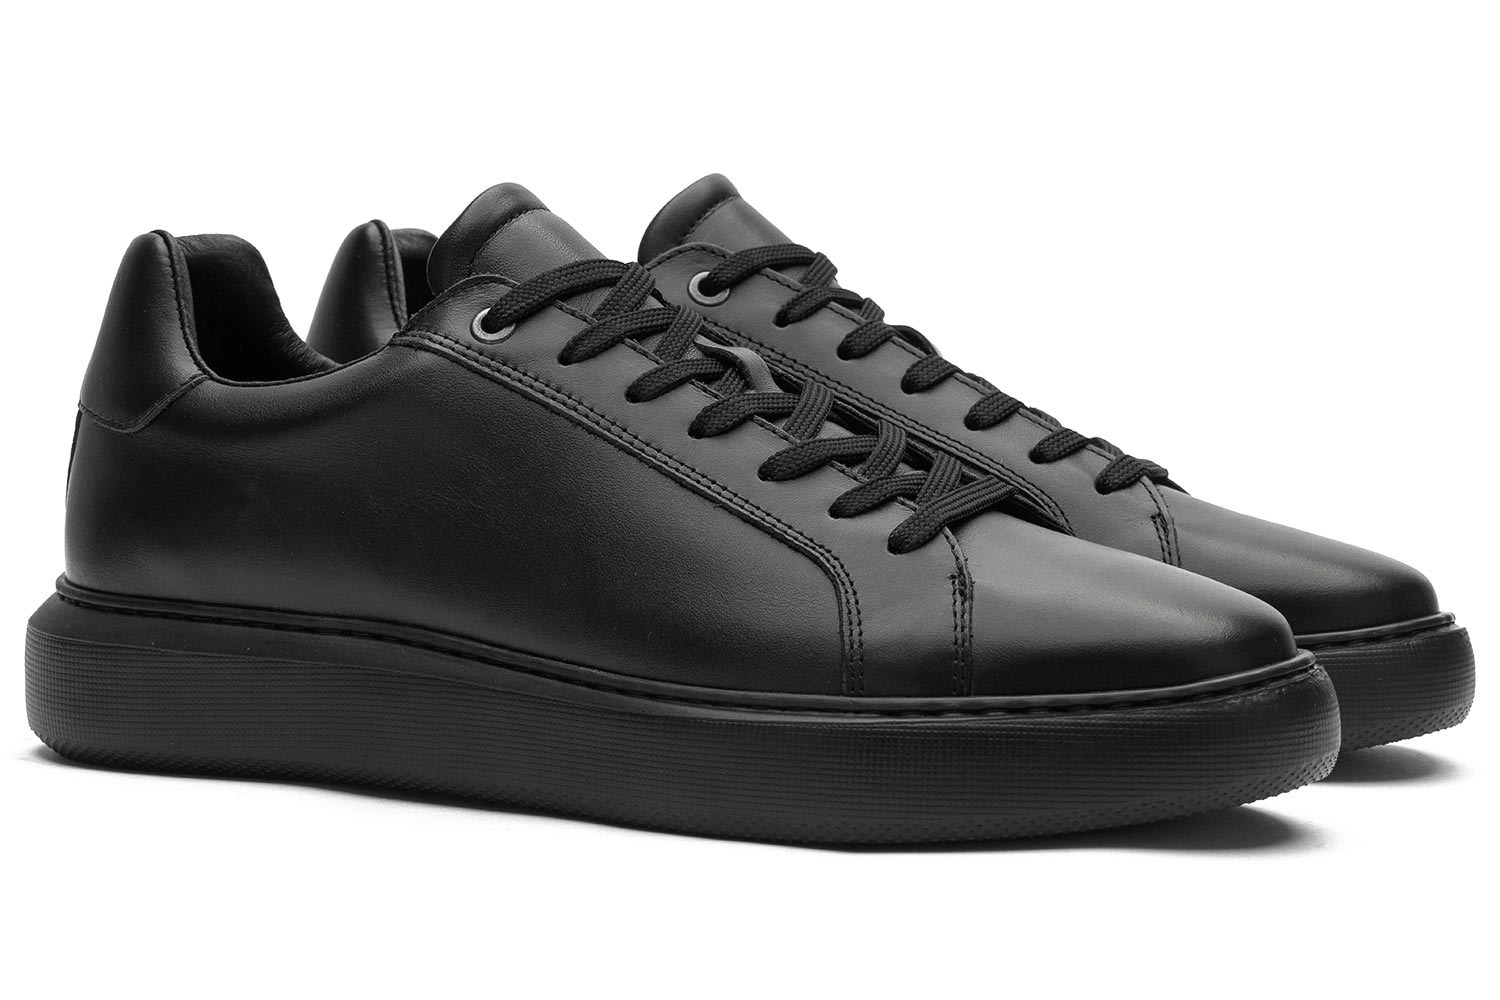 Black genuine leather shoes 0